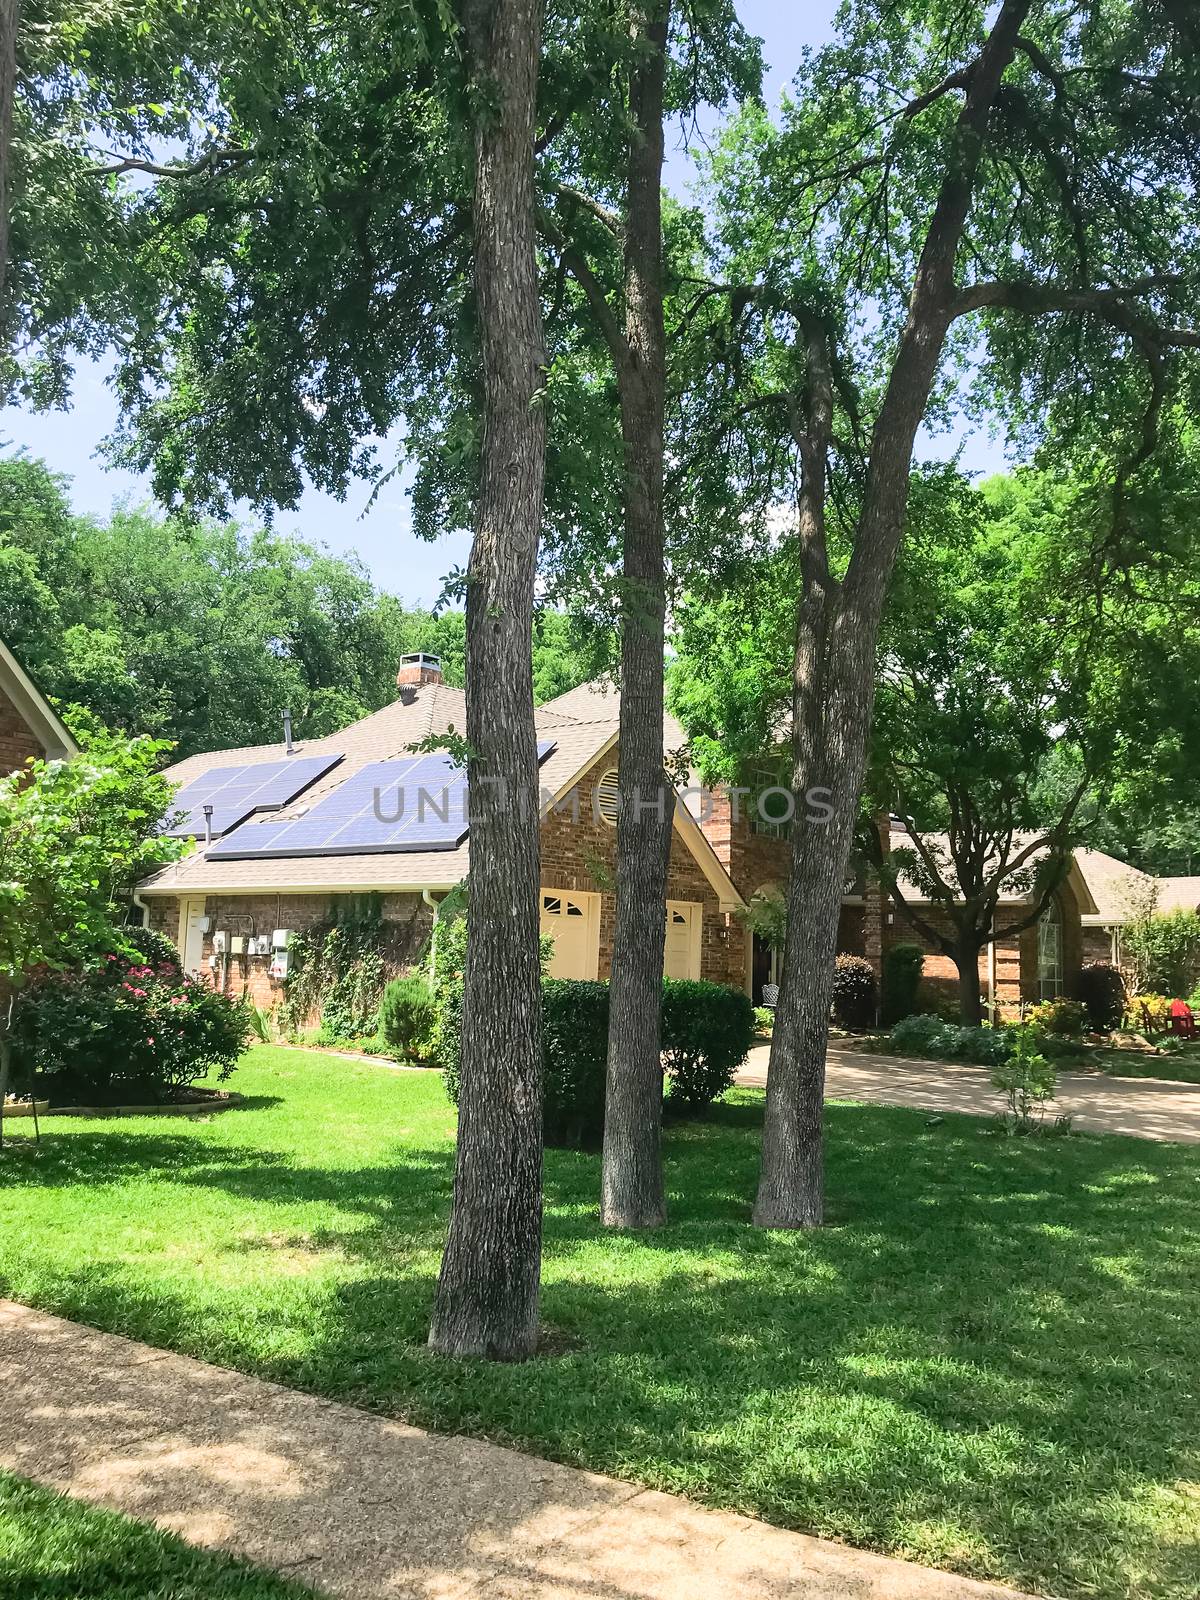 Shady concrete sidewalk pathway in residential neighborhood outside of Dallas, Texas, America. Row of single family houses surrounded by tall trees and solar panel roof.